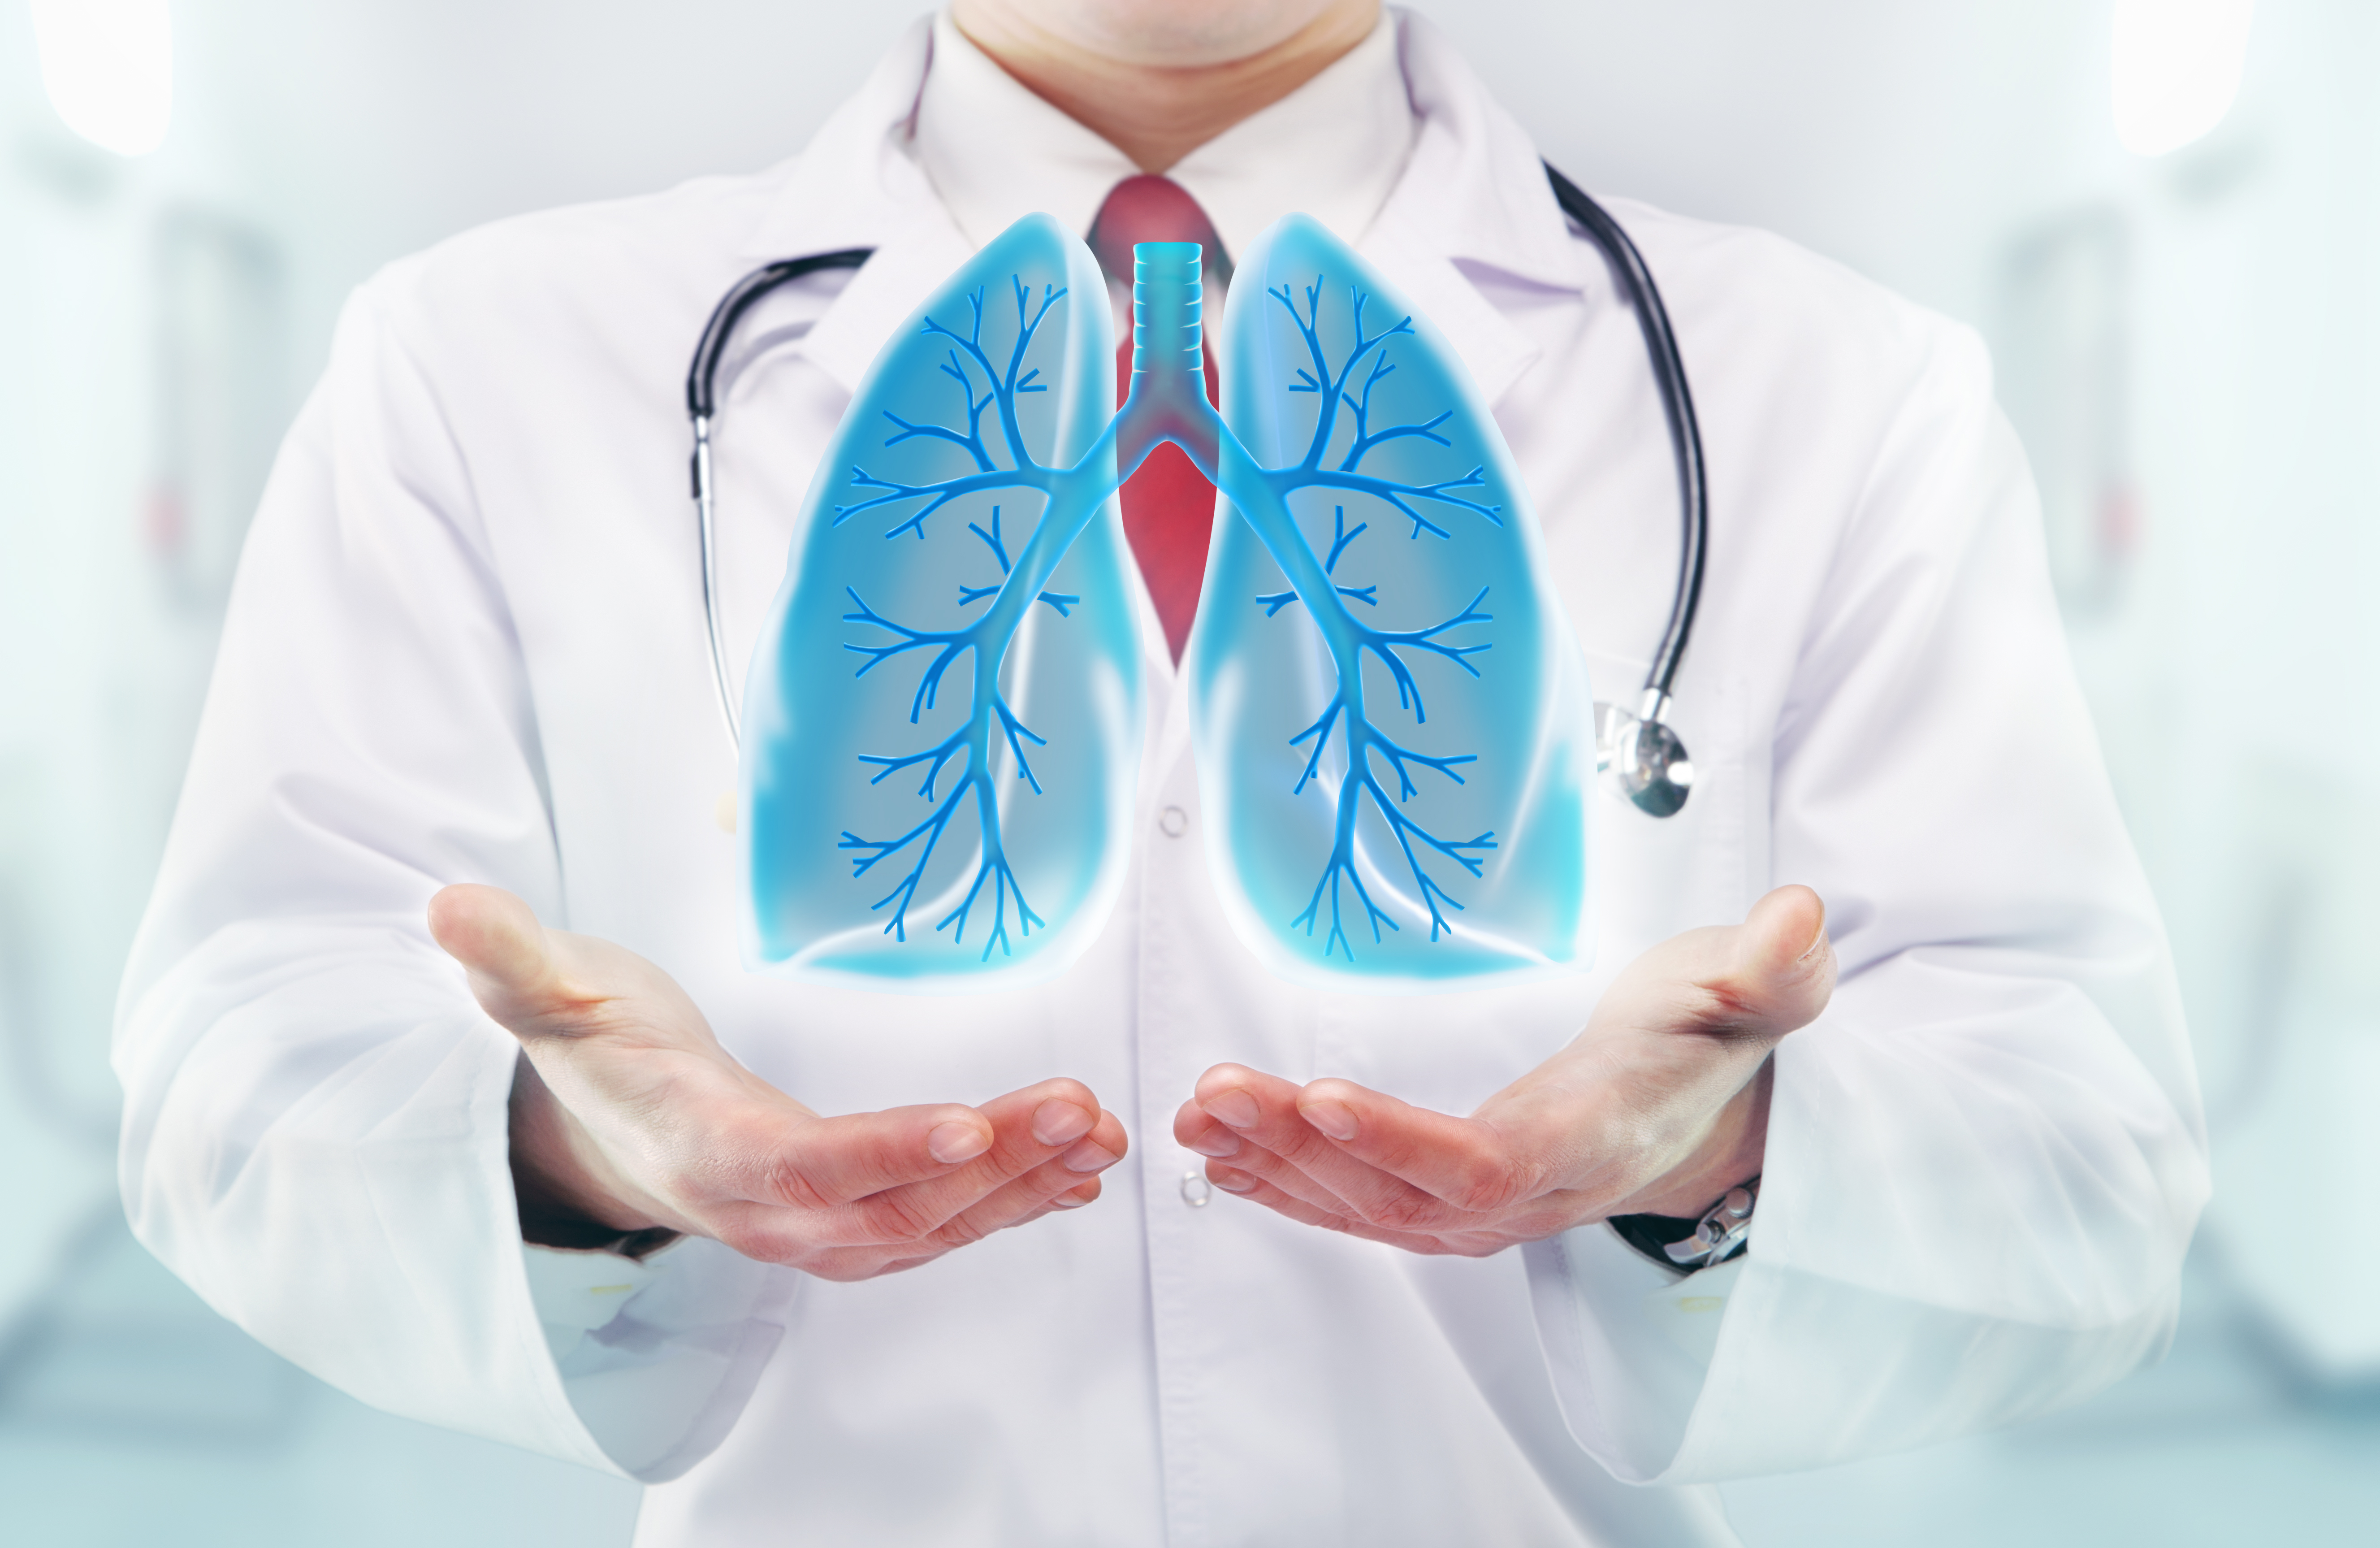 Vertex, Parion Collaboration to Advance Development of Potential Therapeutic Strategy for CF, Other Pulmonary Disorders